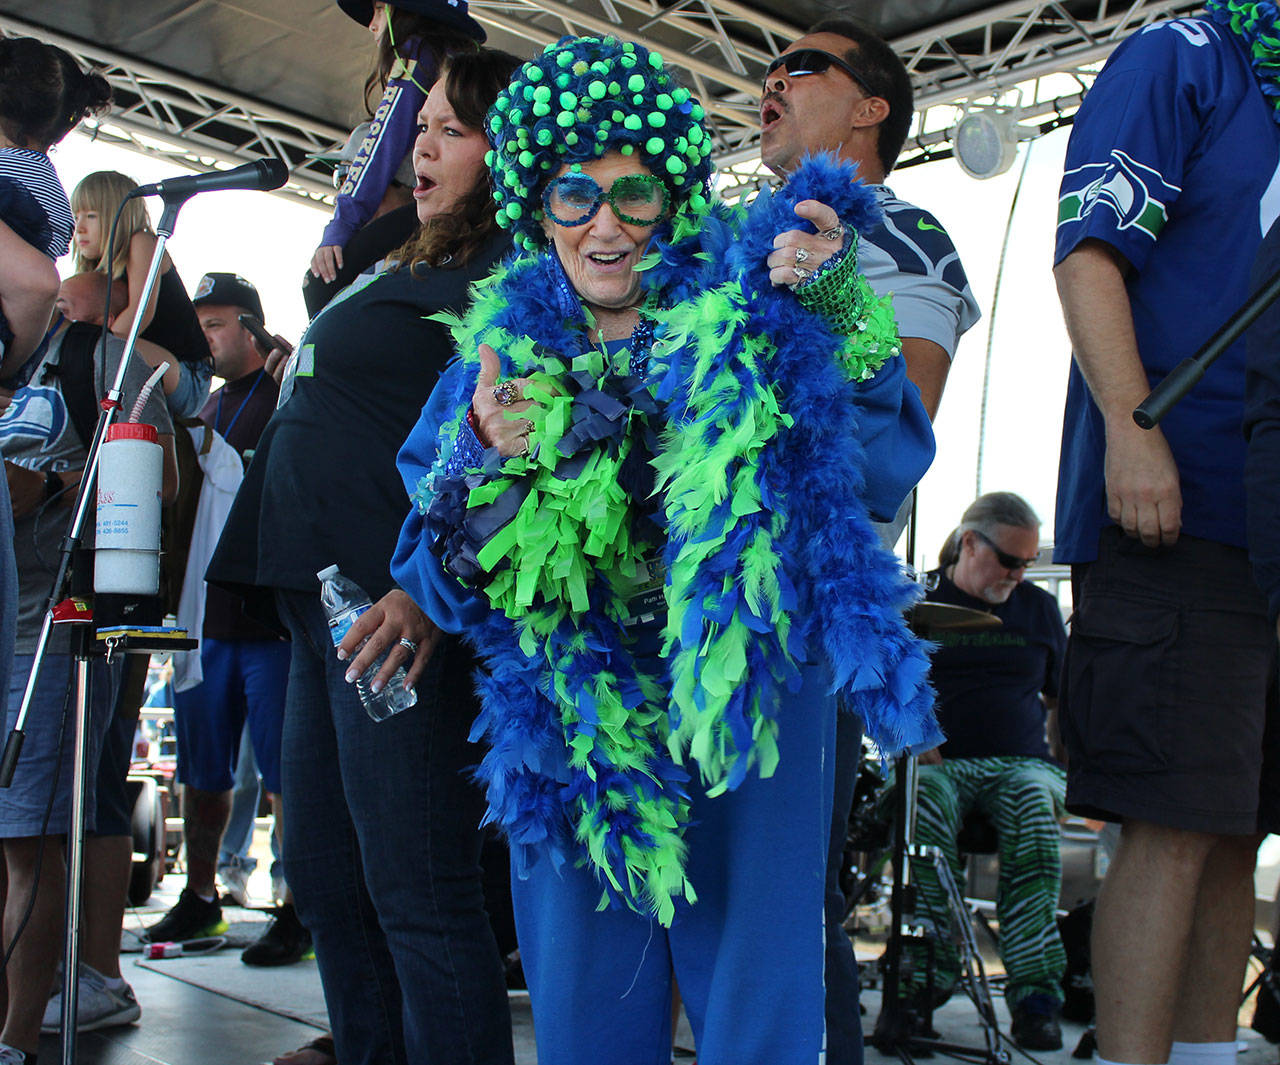 Mama Blue was one of the original Seahawks fans who was making her fourth appearance at Fan Fest. Angelo Bruscas photo.